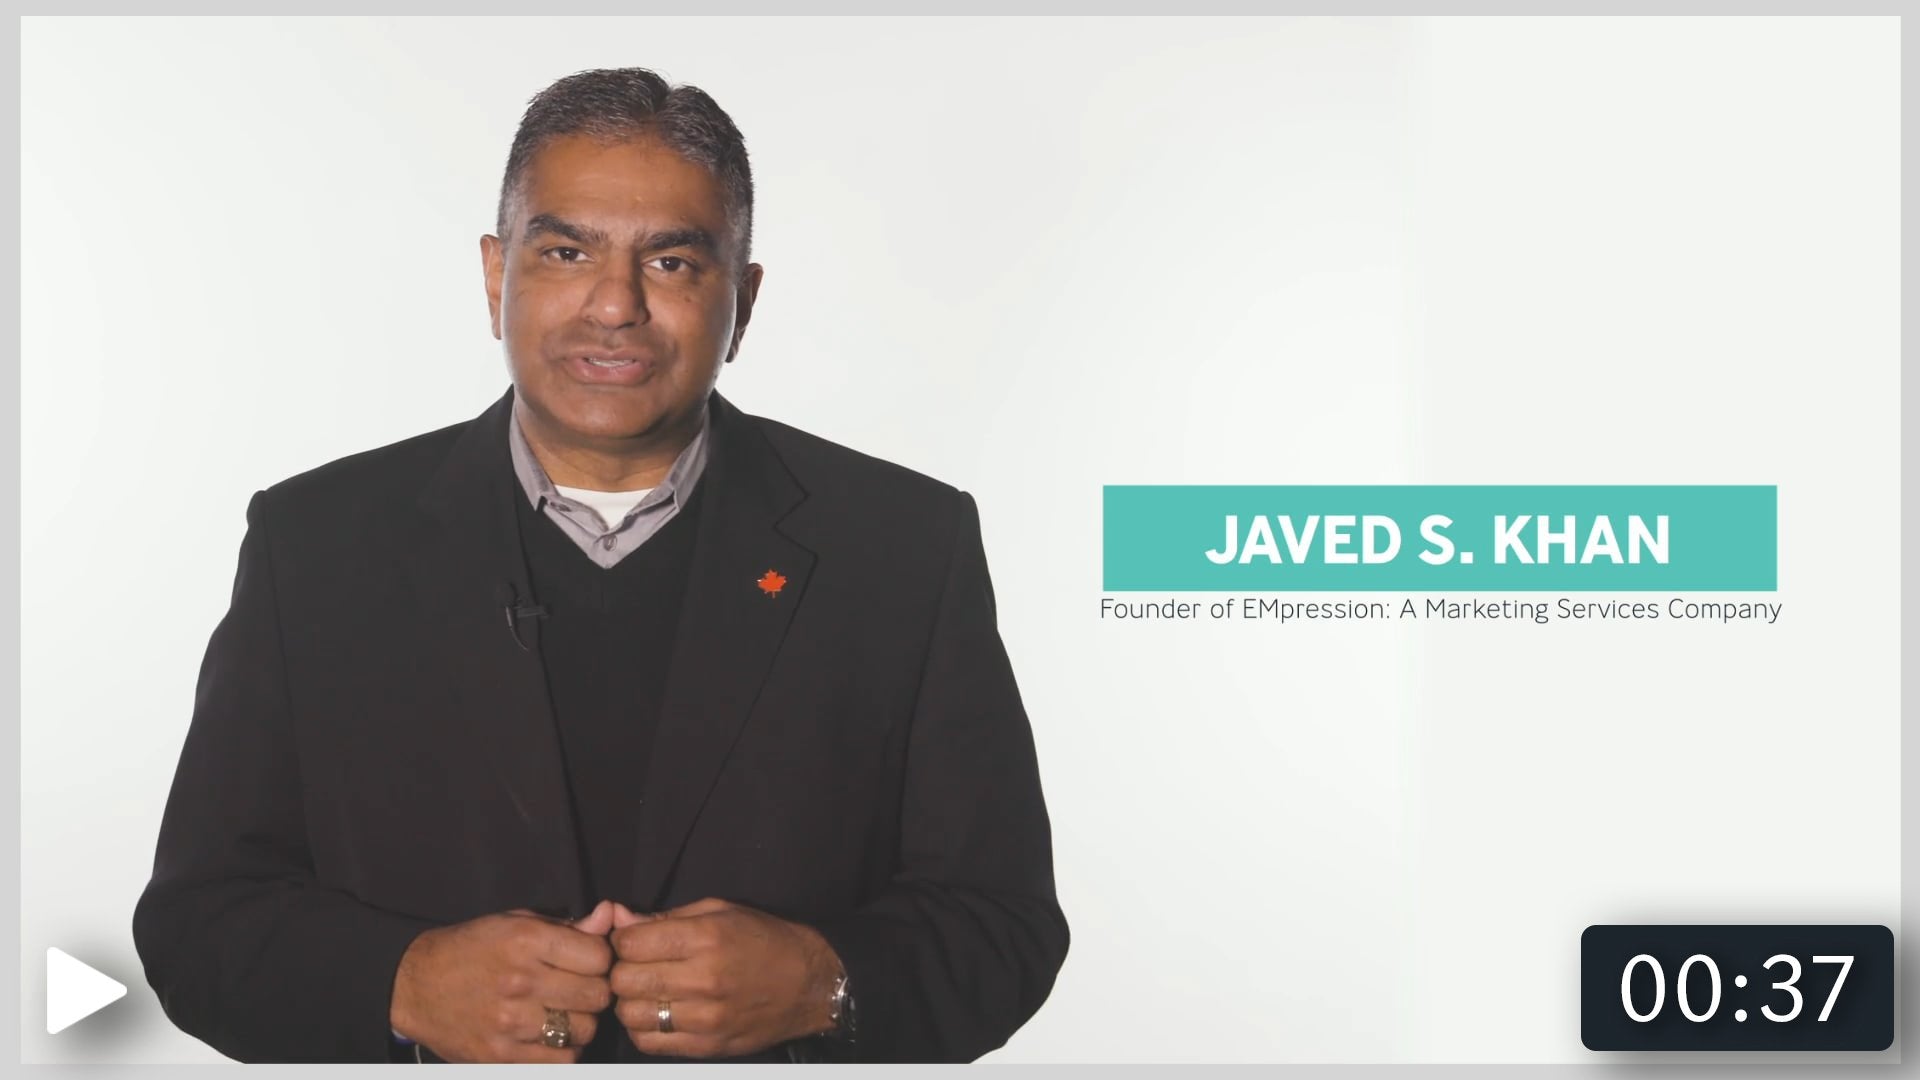 Meet Javed Khan who discusses the importance of developing strong networking etiquette